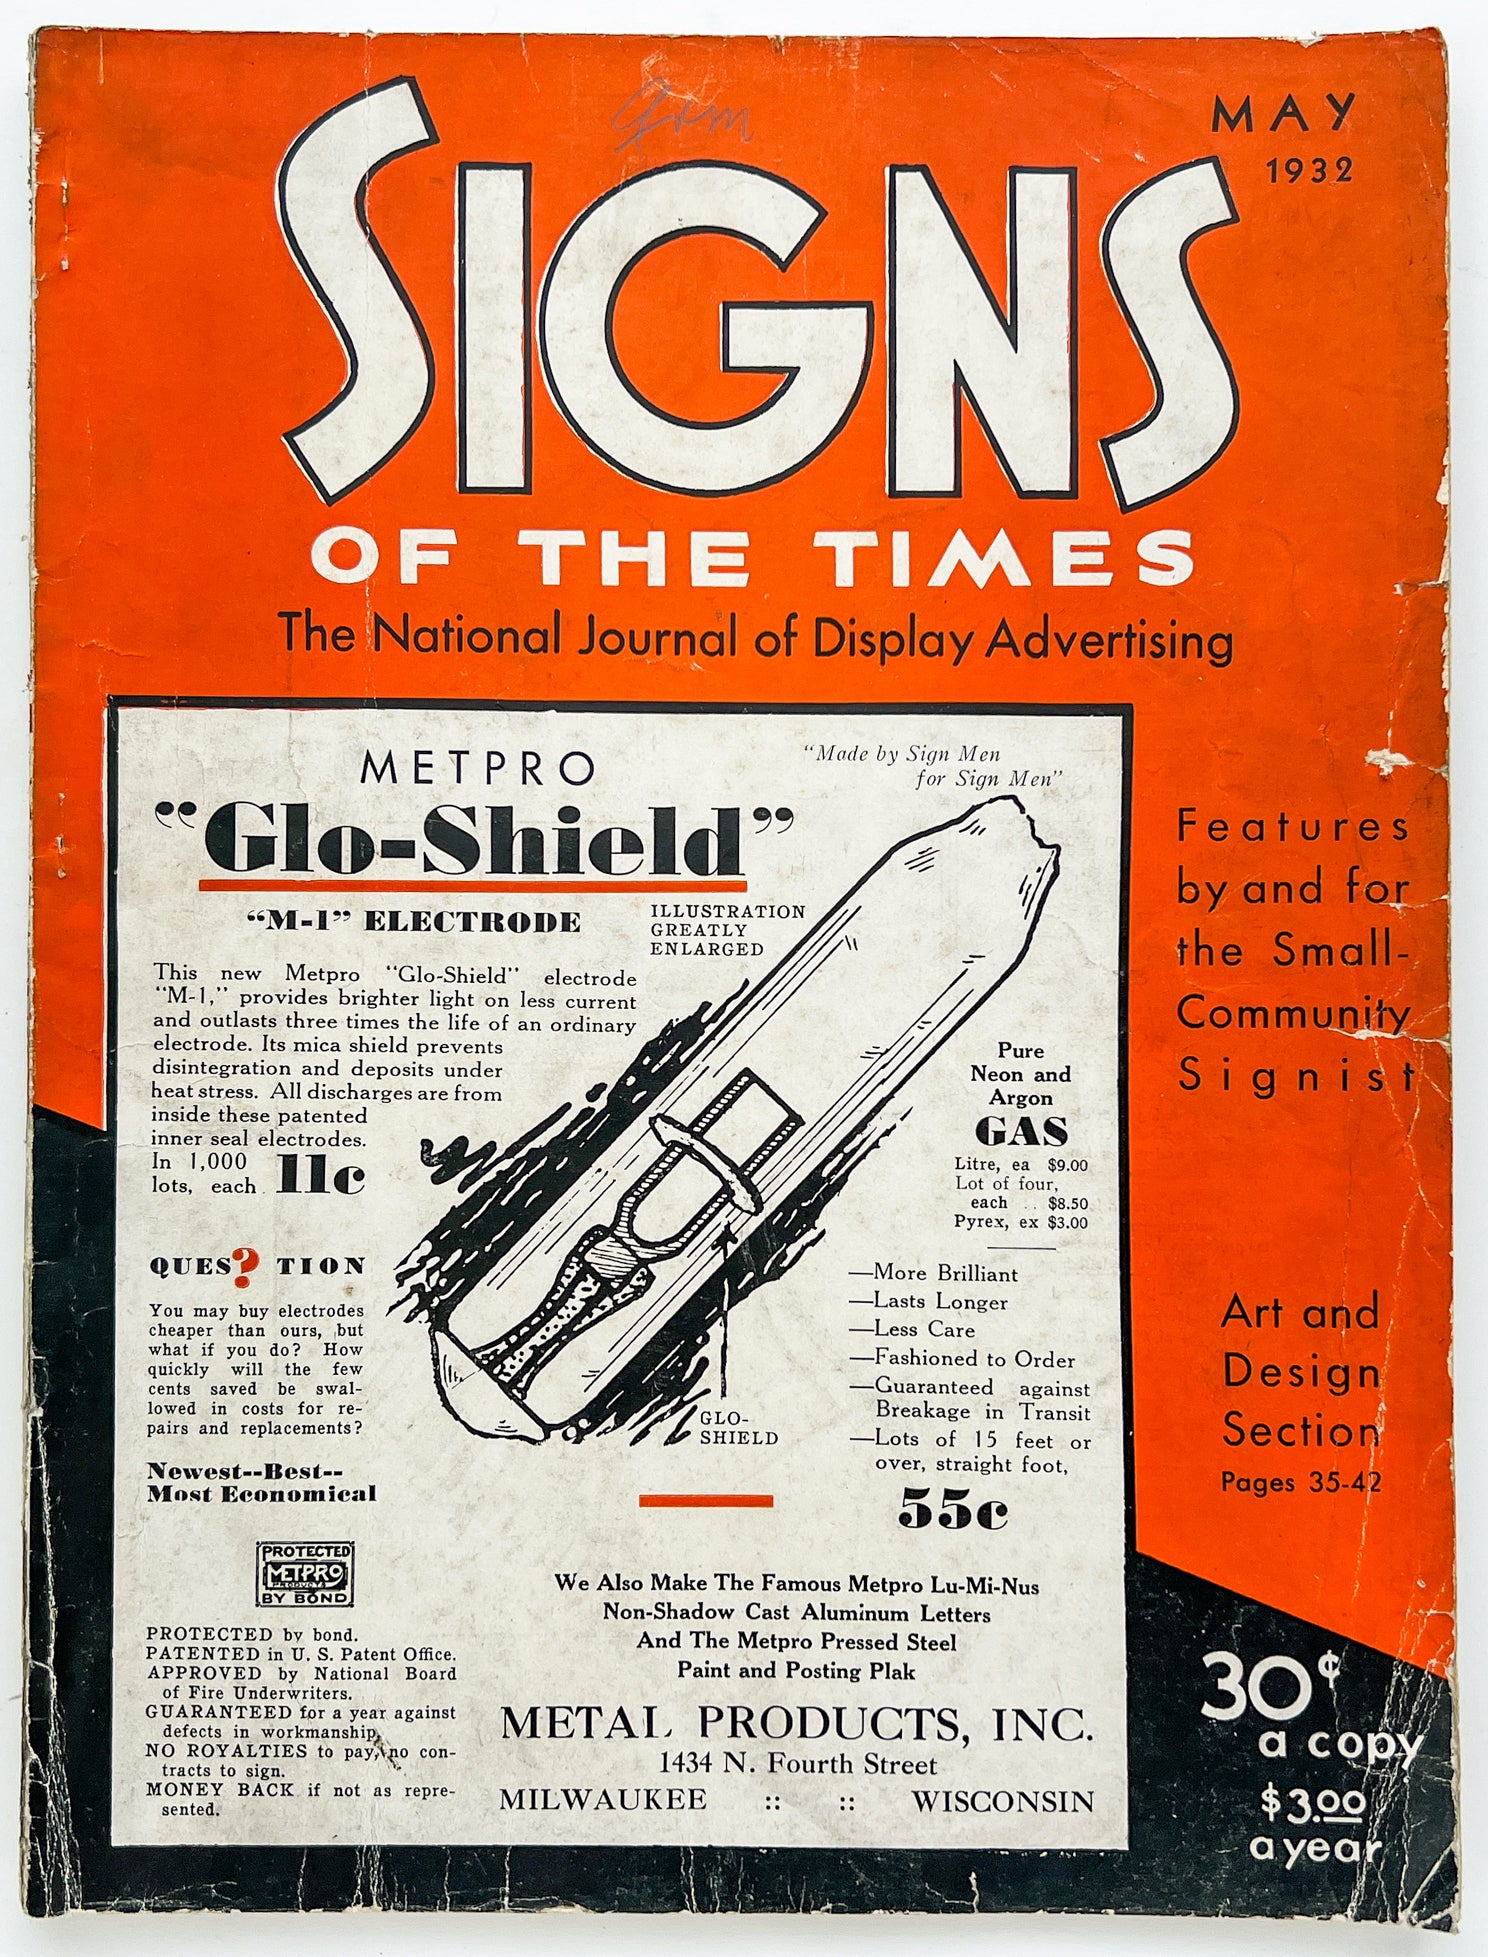 Signs of the Times: The National Journal of Display Advertising, May 1932. Vol. 71, No. 1.